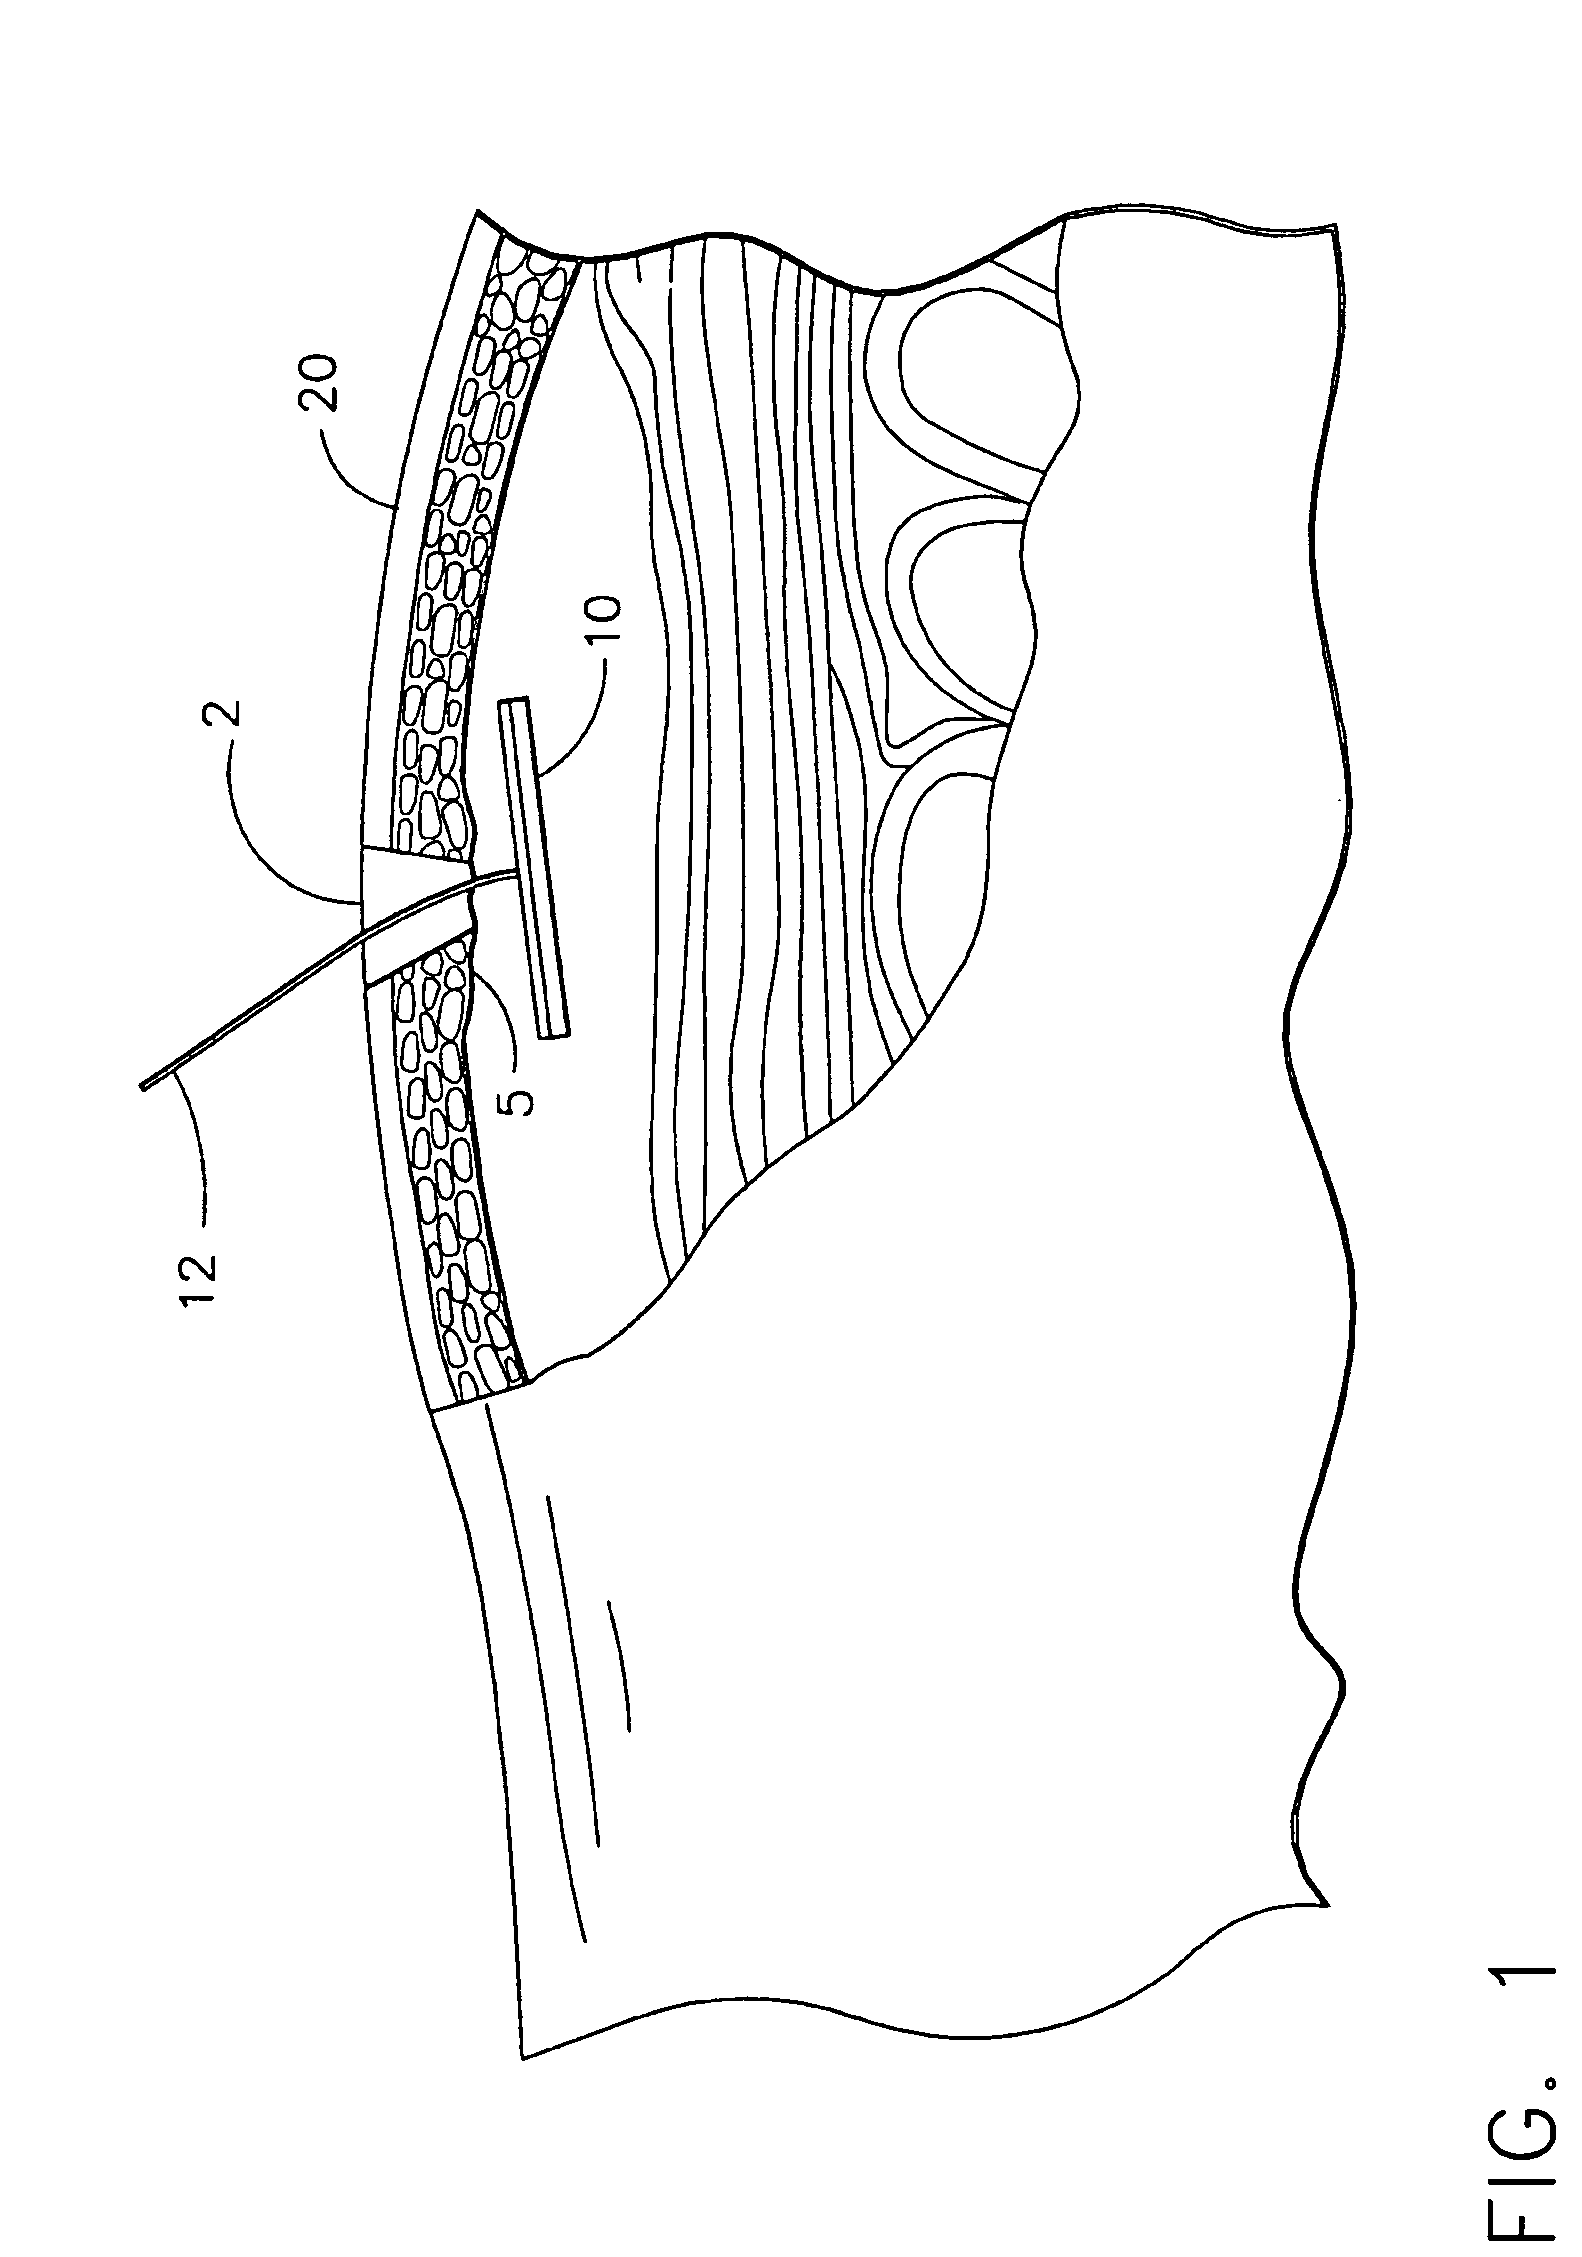 Method and device for minimally invasive implantation of biomaterial